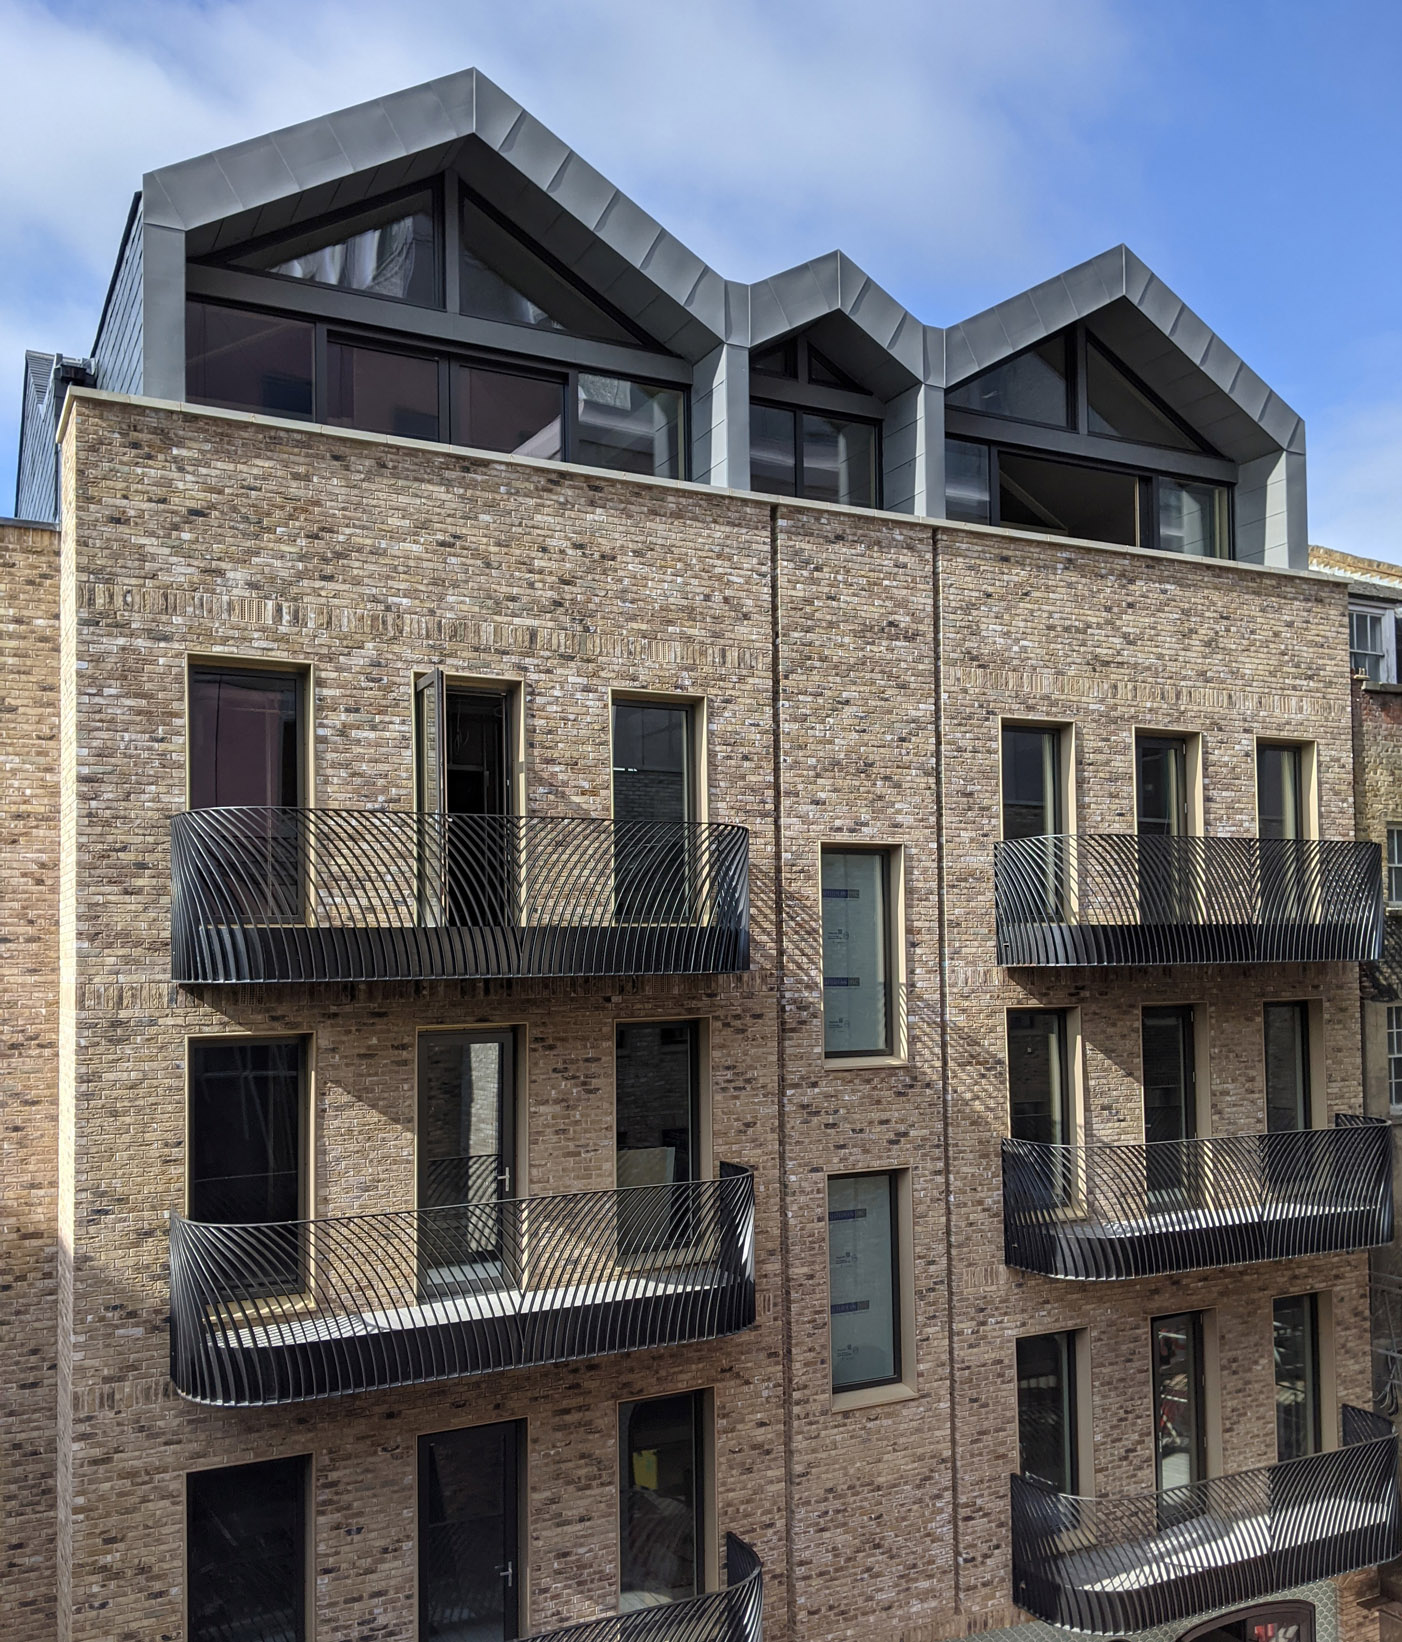 Soho Estates brings new affordable homes to central London’s Greek Street with Soho Housing